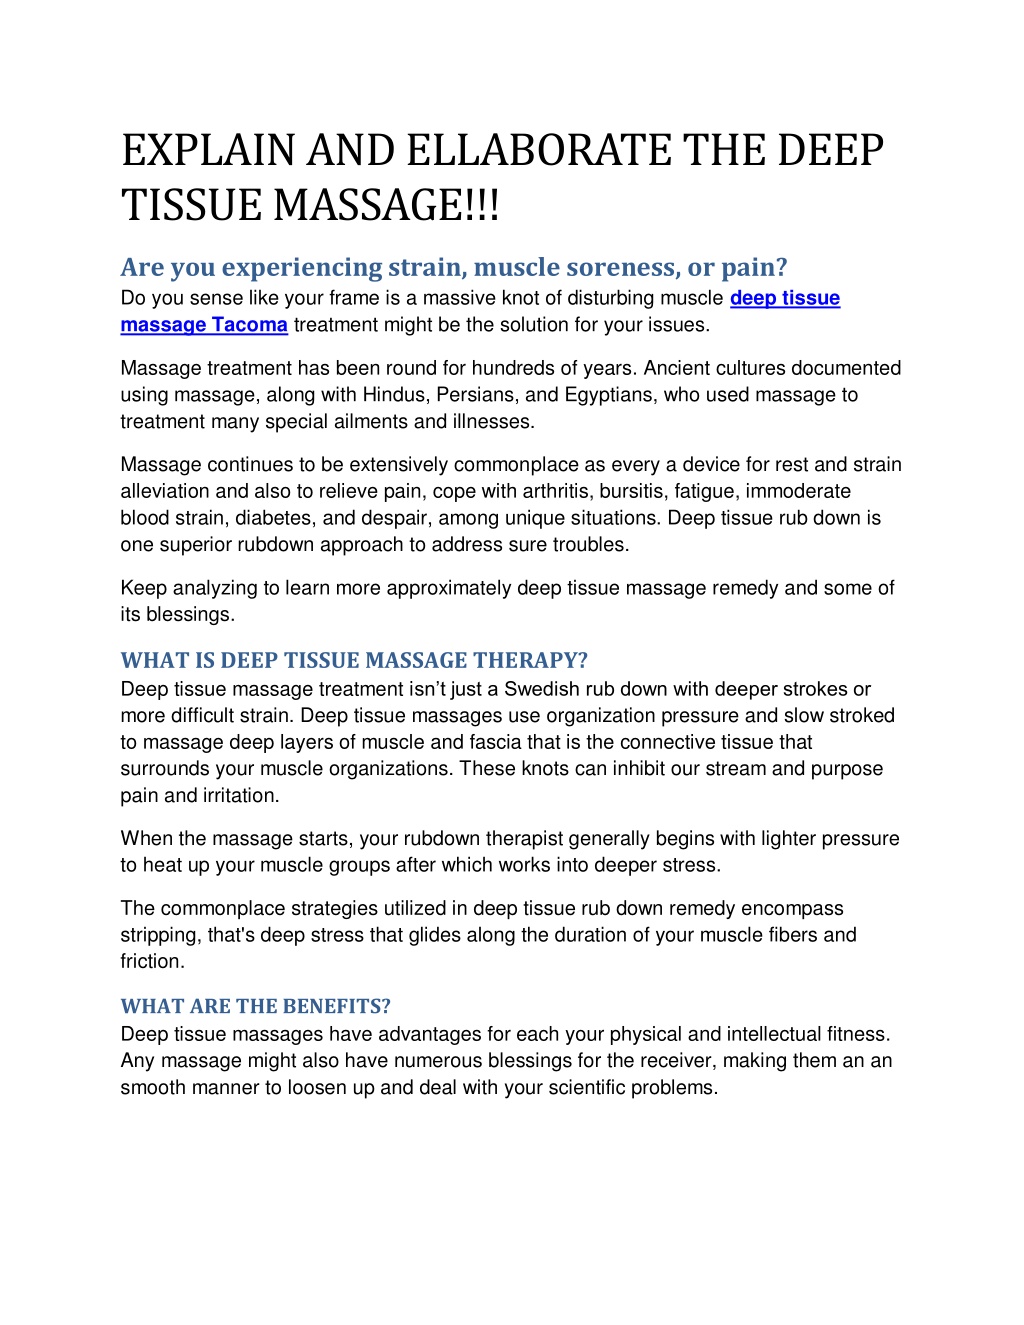 Ppt Explain And Ellaborate The Deep Tissue Massage Powerpoint Presentation Id11166304